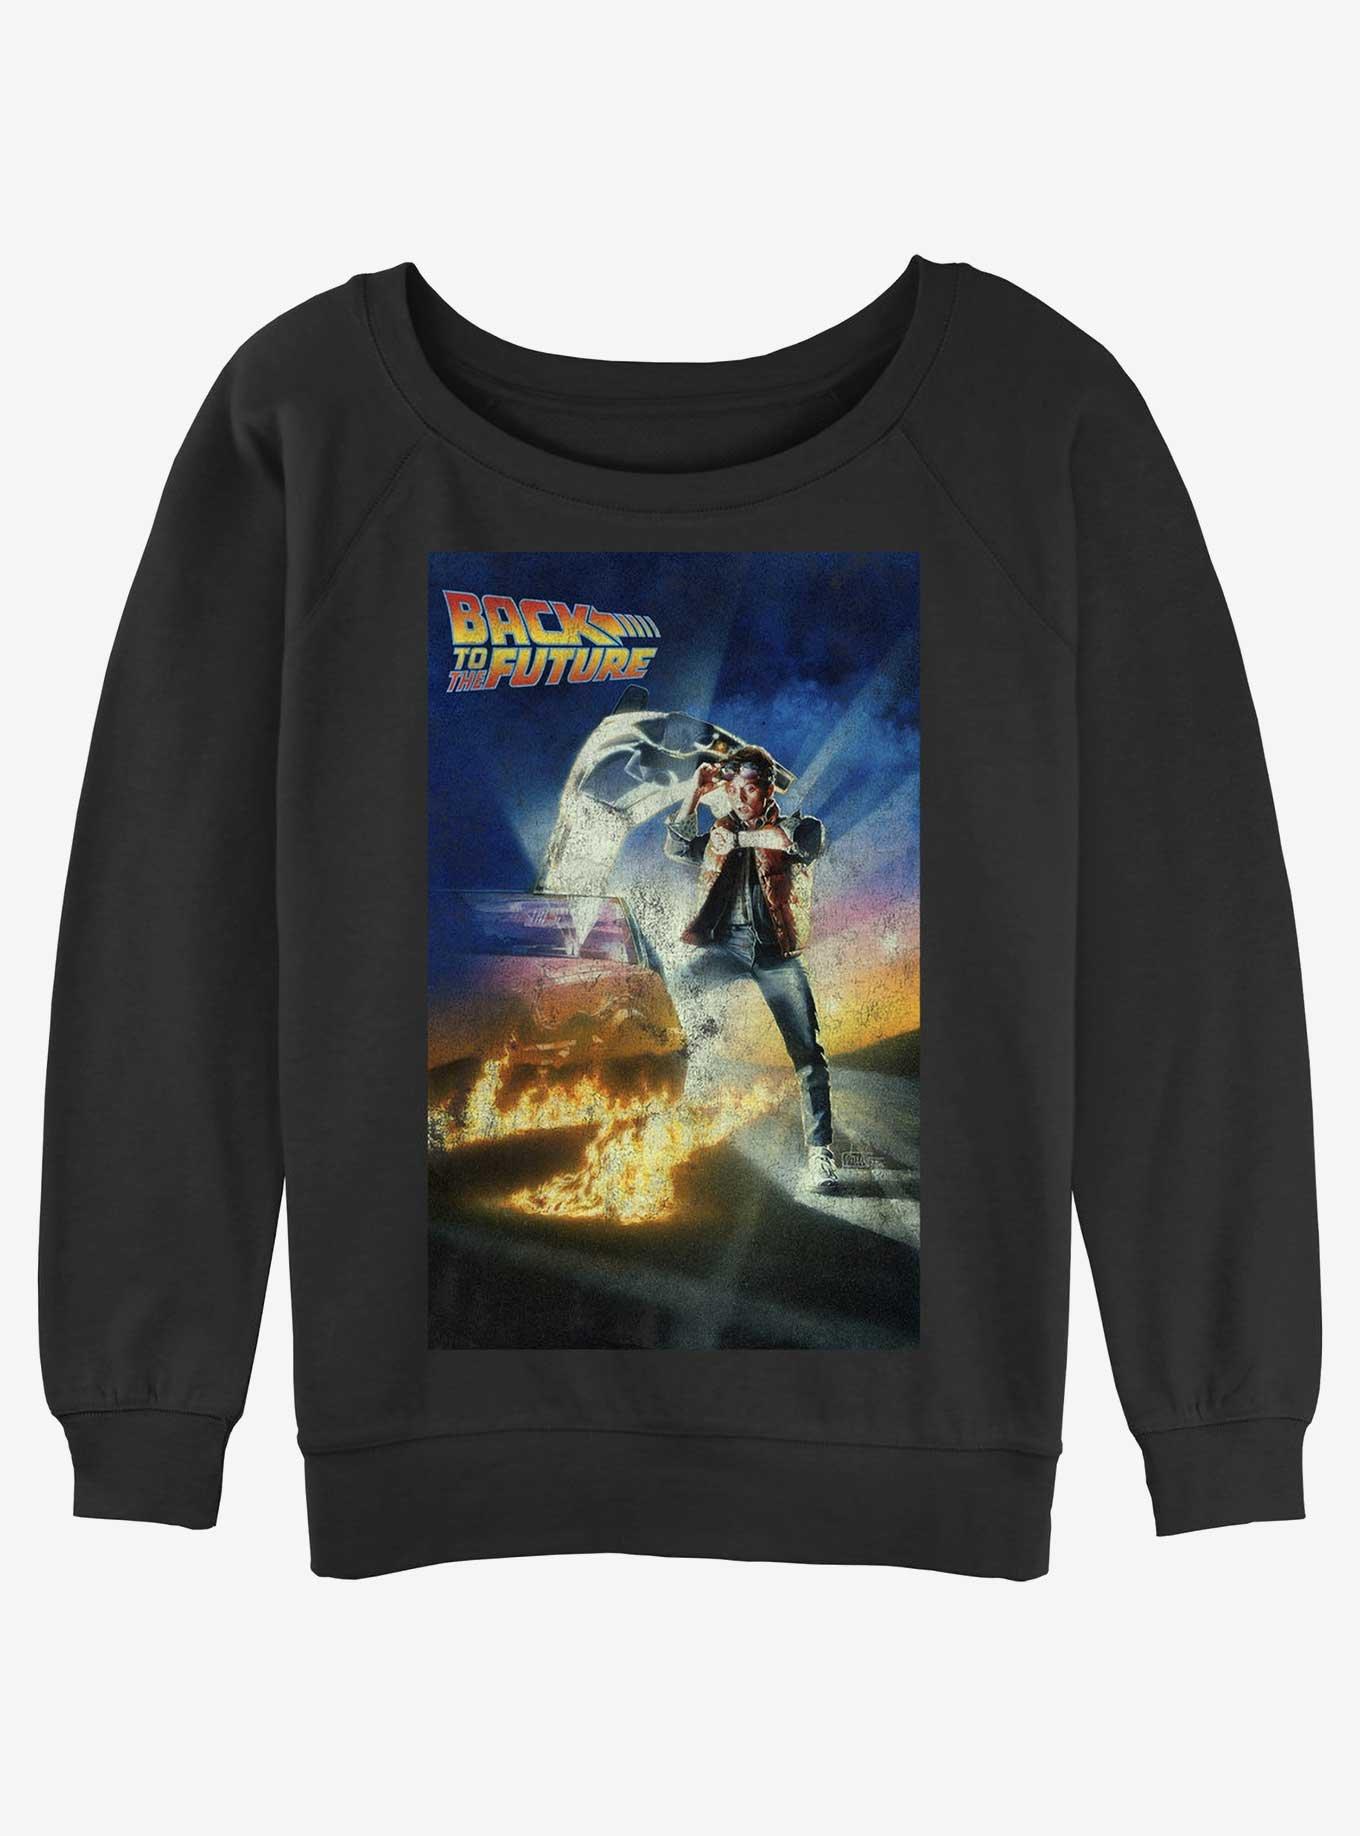 Back to the Future Classic Poster Girls Slouchy Sweatshirt, BLACK, hi-res